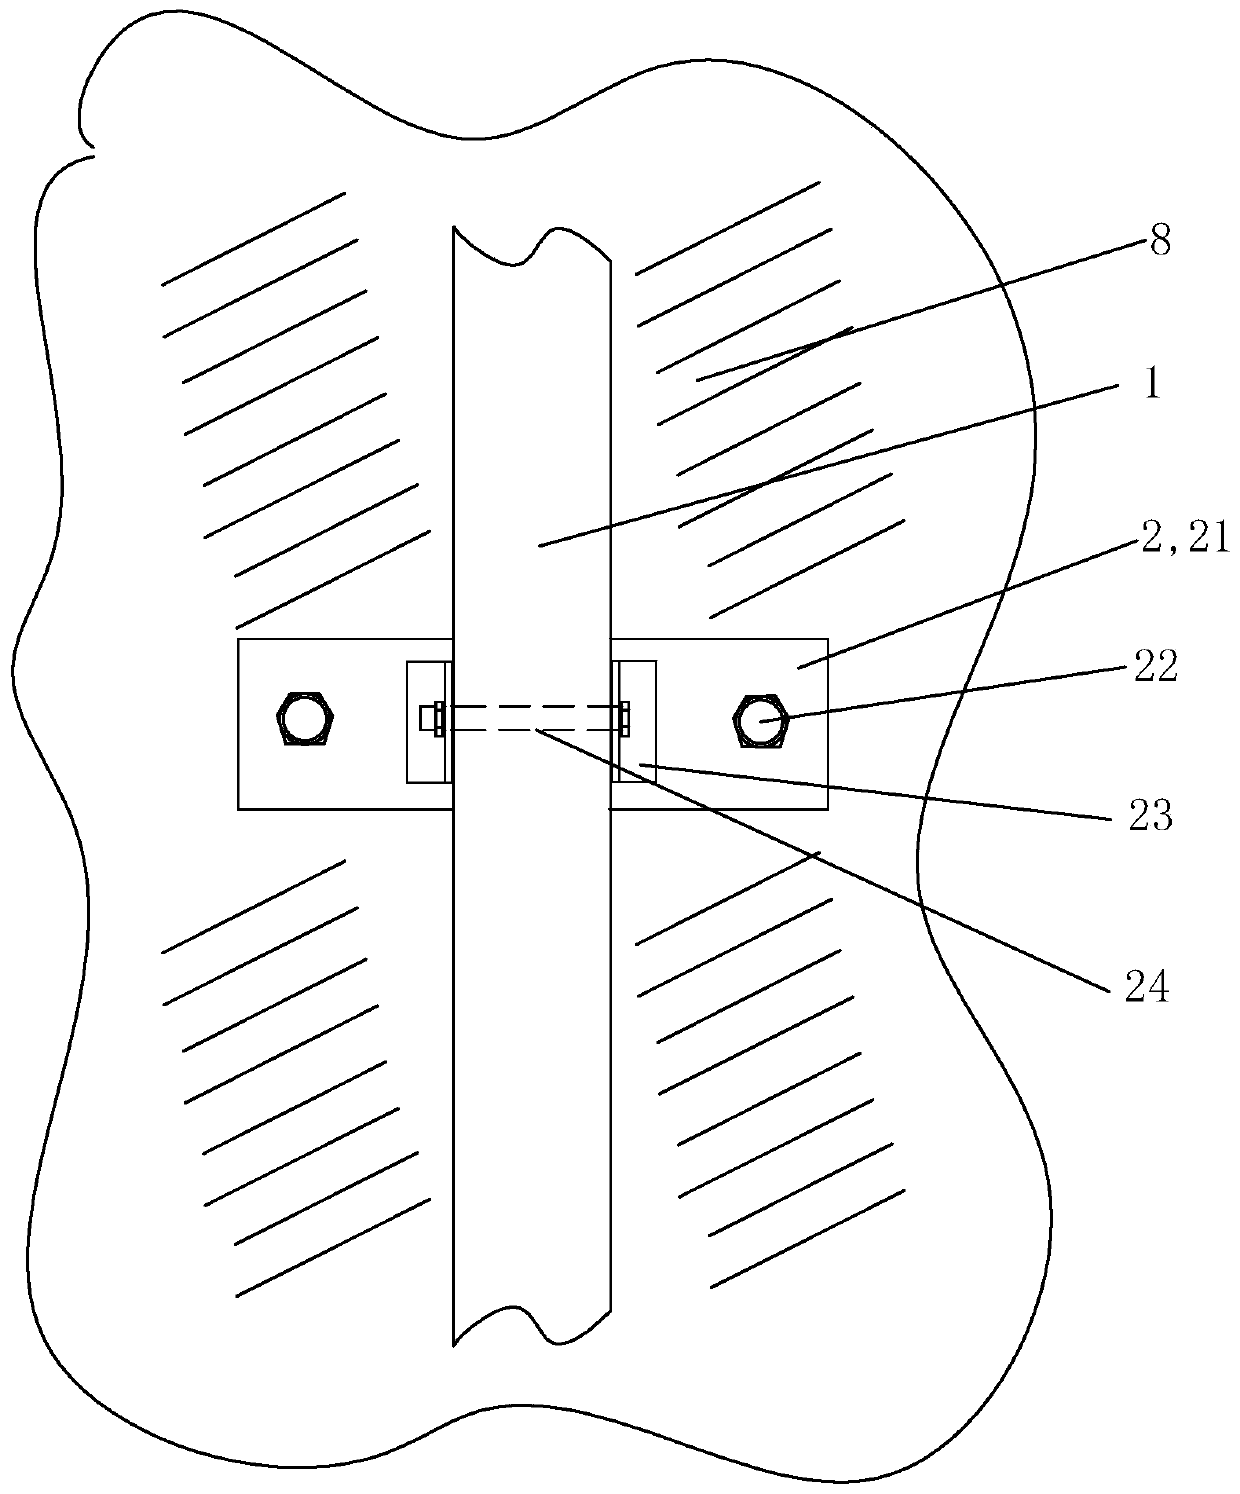 Construction method of non-cut plug-in installation of wall decoration board